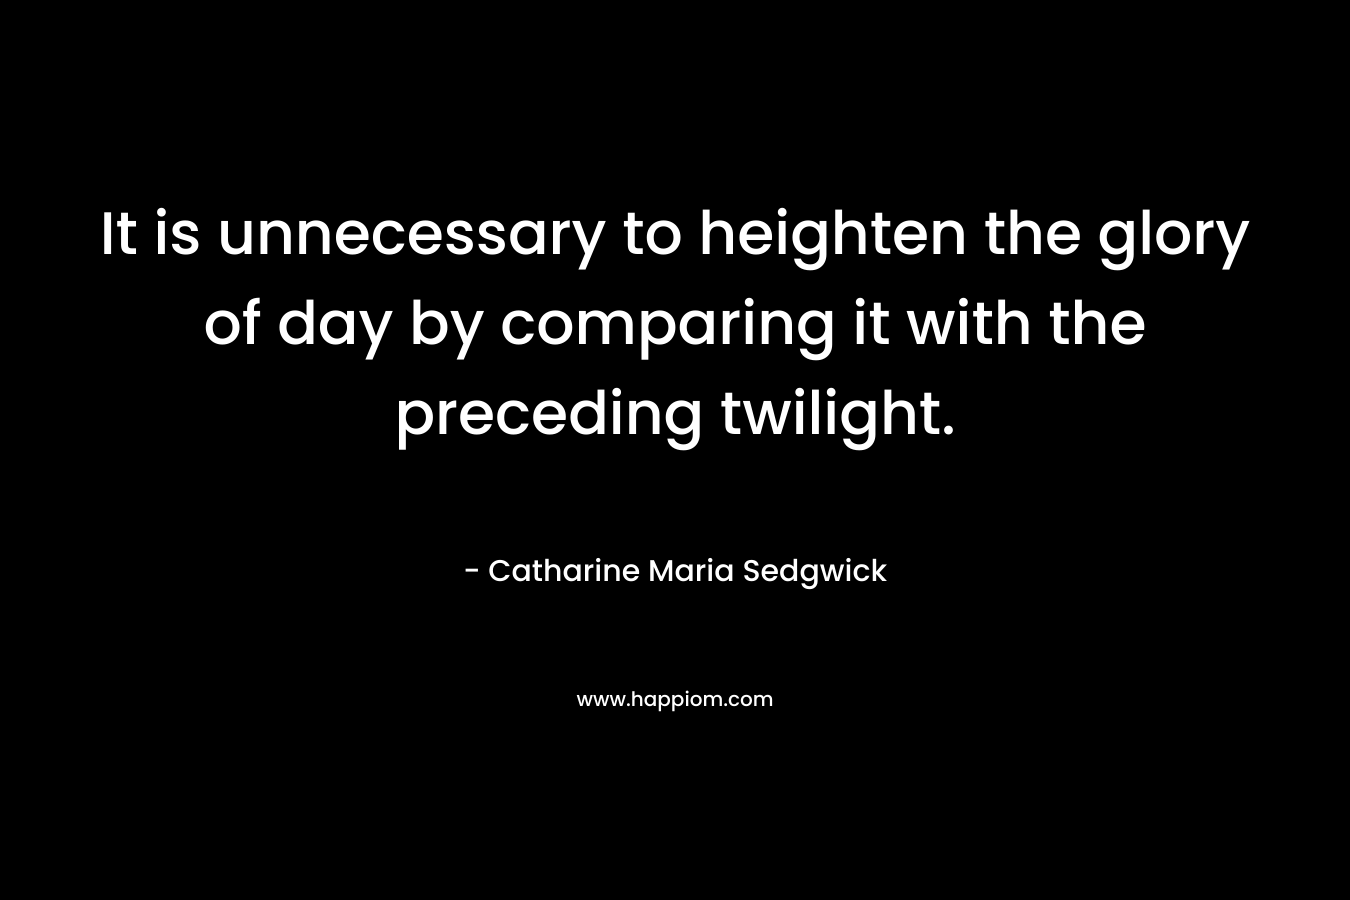 It is unnecessary to heighten the glory of day by comparing it with the preceding twilight. – Catharine Maria Sedgwick